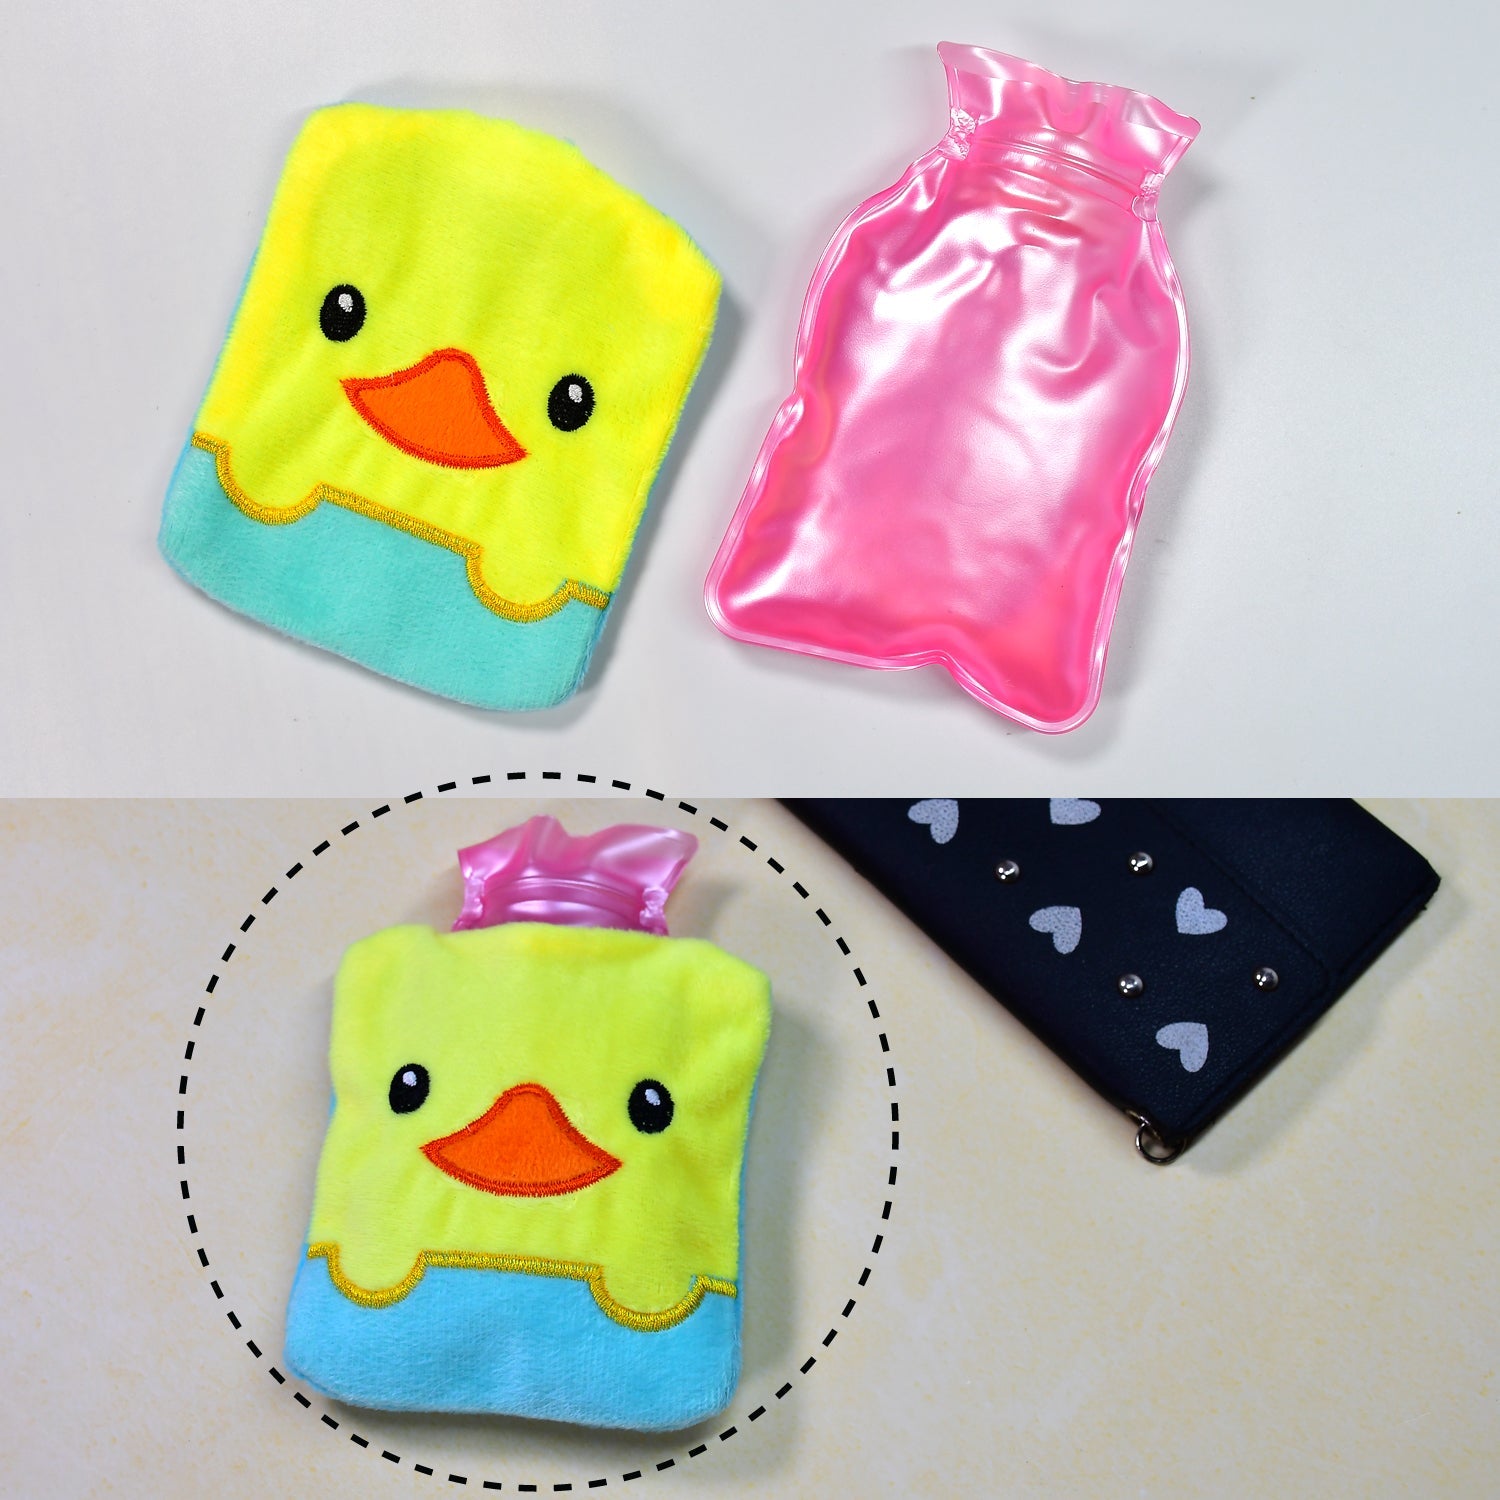 6524 Yellow Duck design small Hot Water Bag with Cover for Pain Relief, Neck, Shoulder Pain and Hand, Feet Warmer, Menstrual Cramps. DeoDap